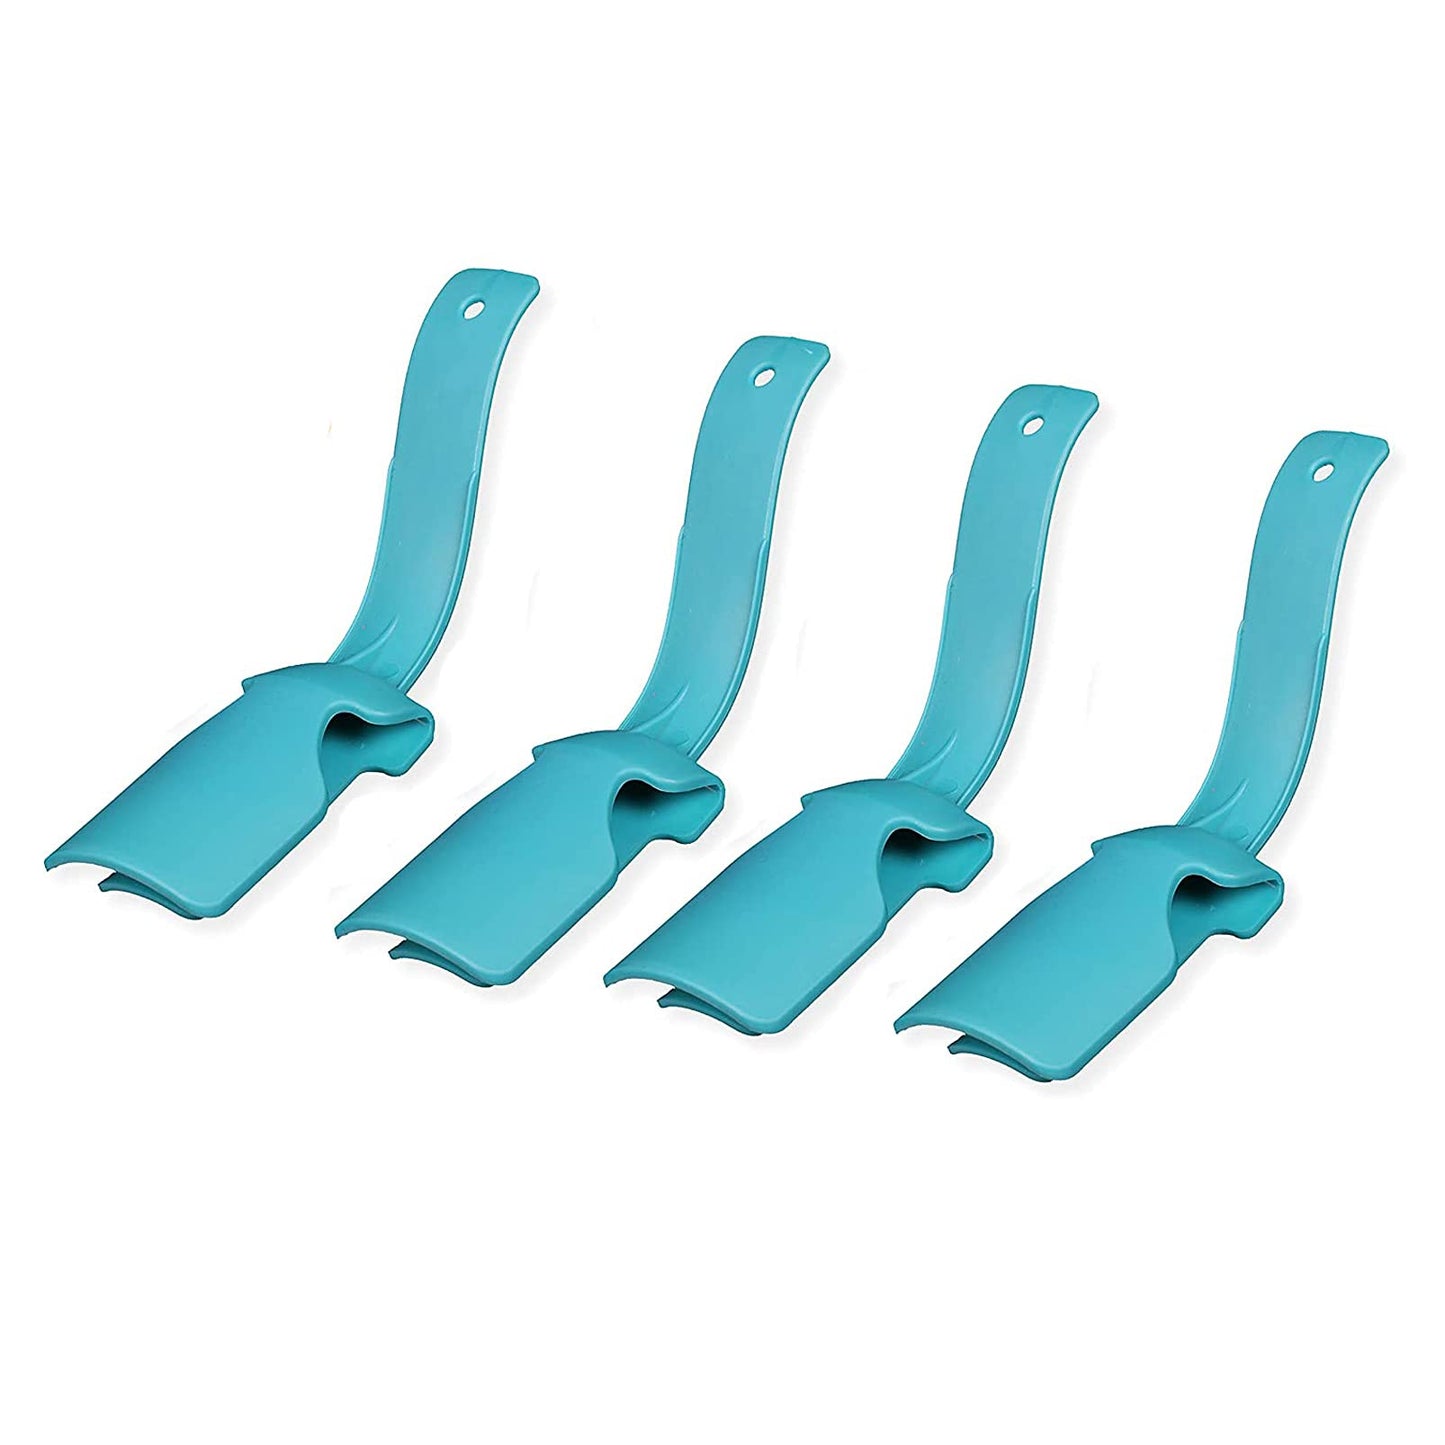 Small Plastic Shoe Horn for Dressing Aid, Unisex and Portable Shoehorn (4 Pieces Contained)